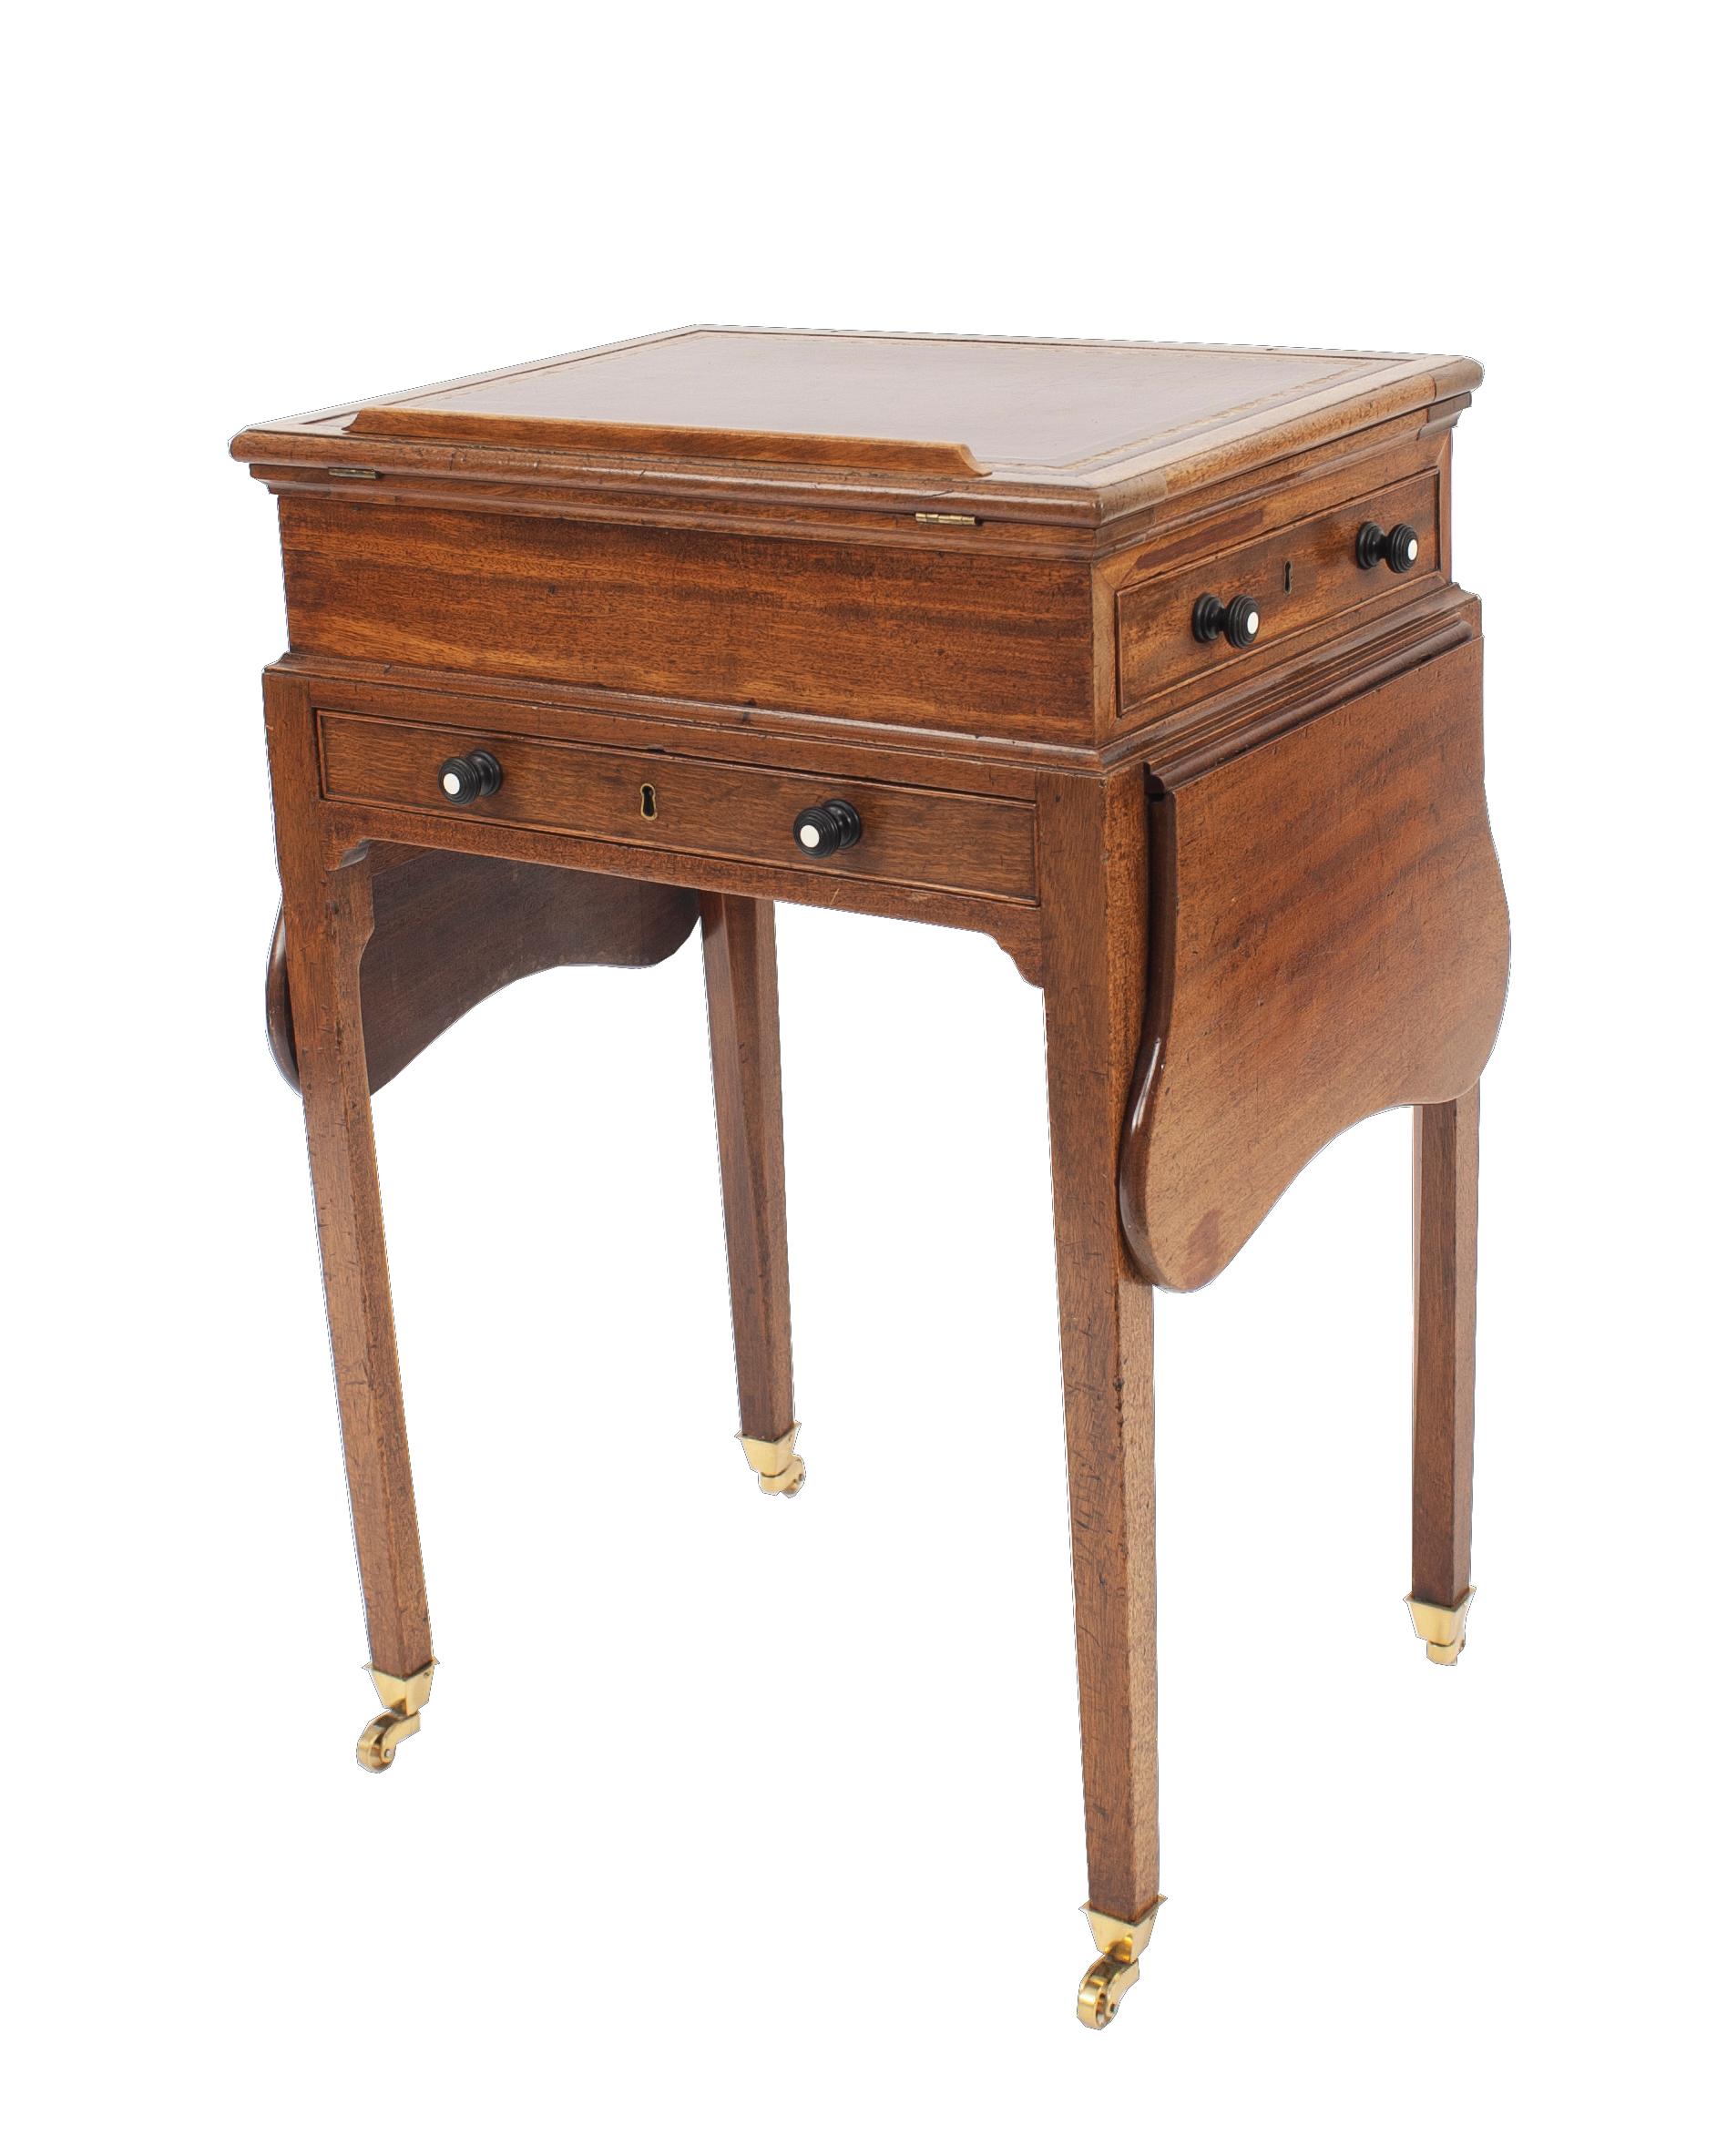 English Georgian style '19th century' walnut end table (desk) with drop sides (10